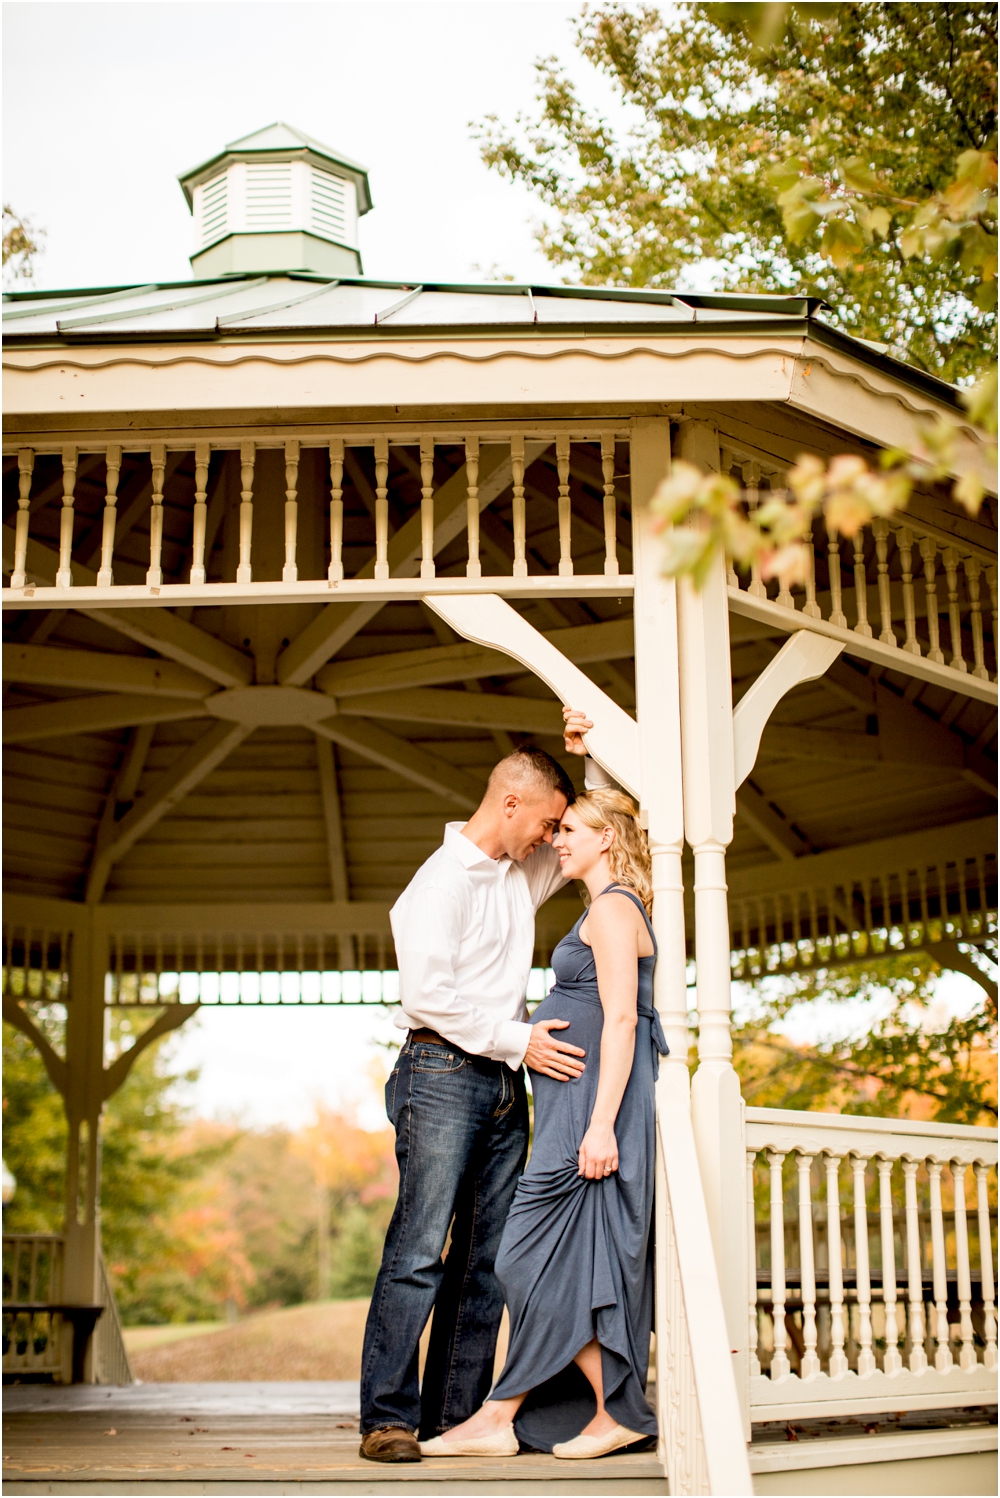 laura+luke+annapolis+quiet+waters+anniversary+maternity+session+living+radiant+photography+photos+stomped_0015.jpg